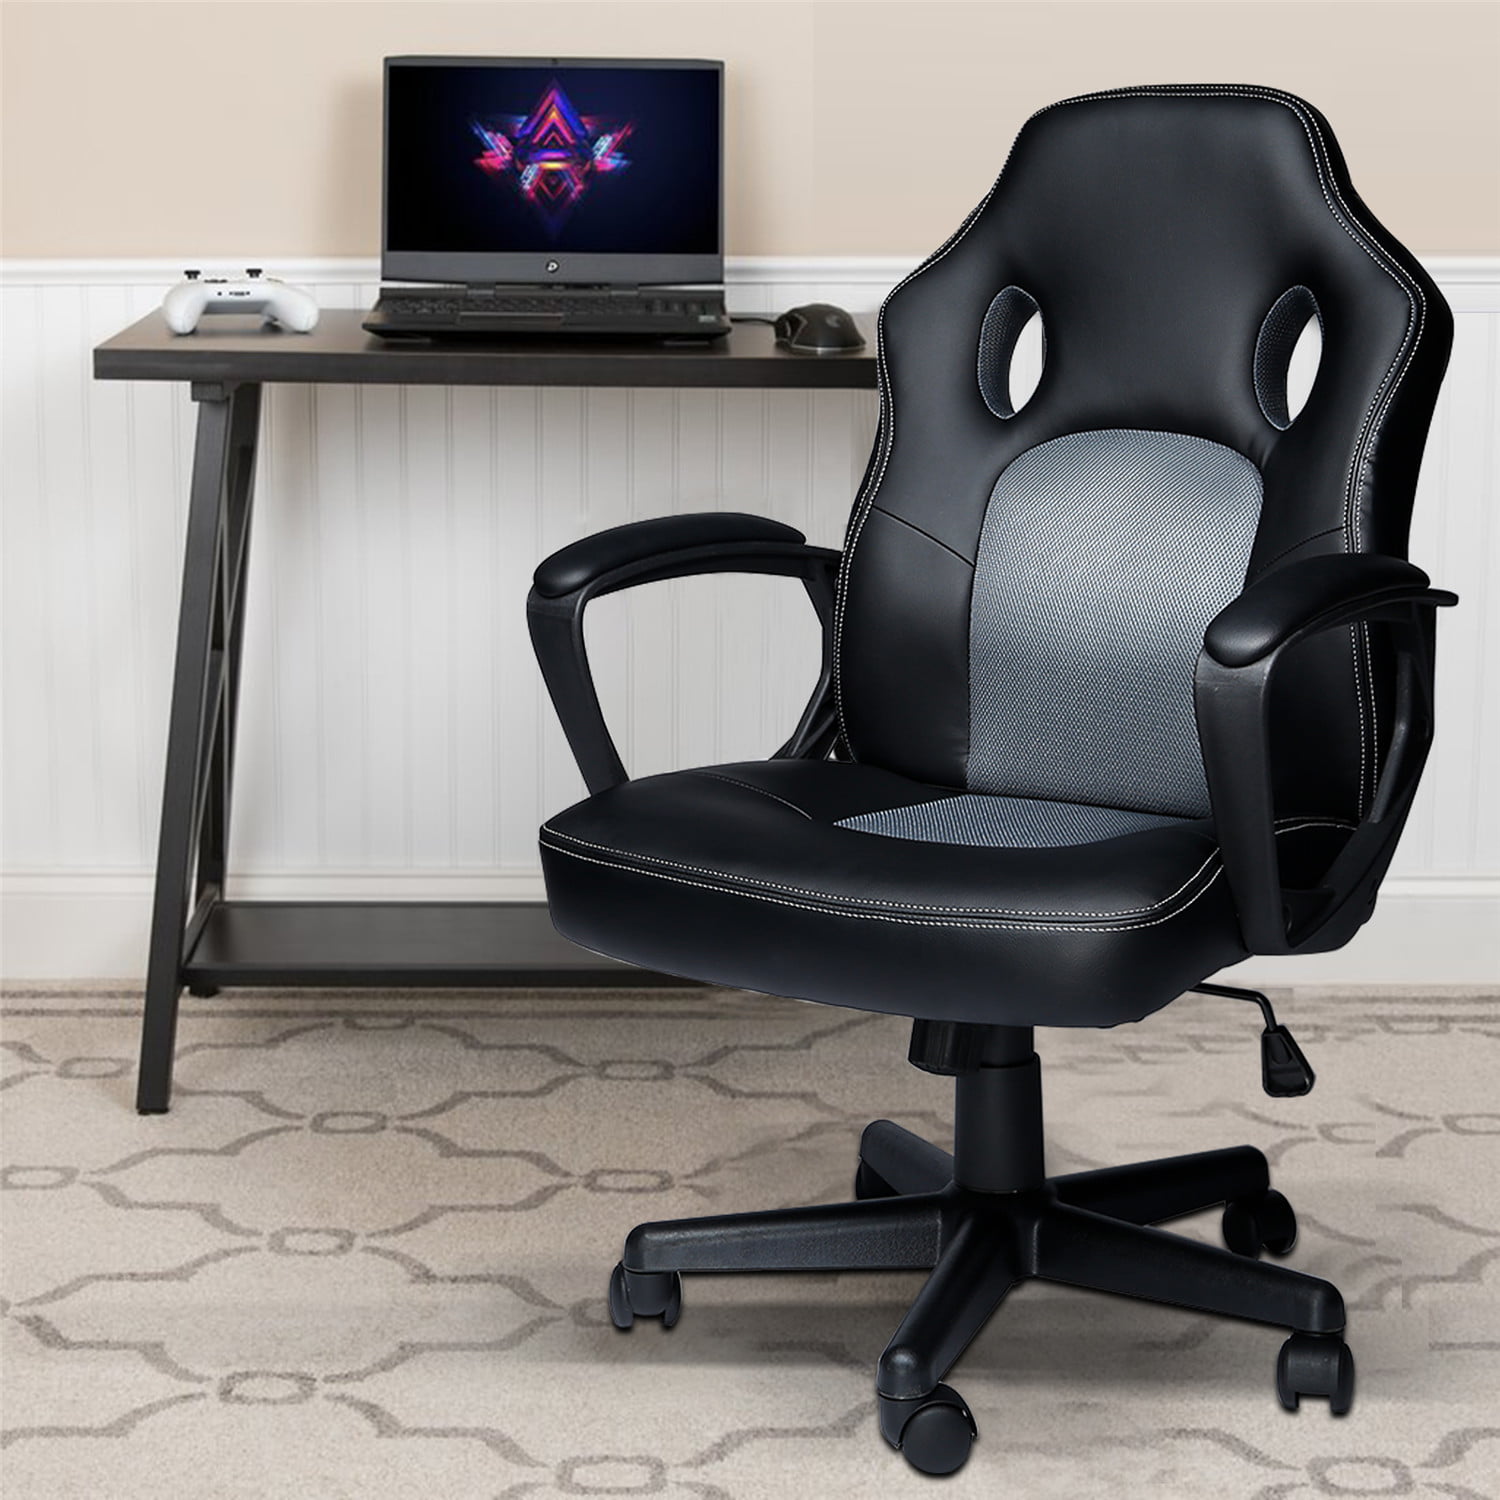 Details about   Gaming Chair Racing Computer PU High Back Office Adjustable Swivel Chairs